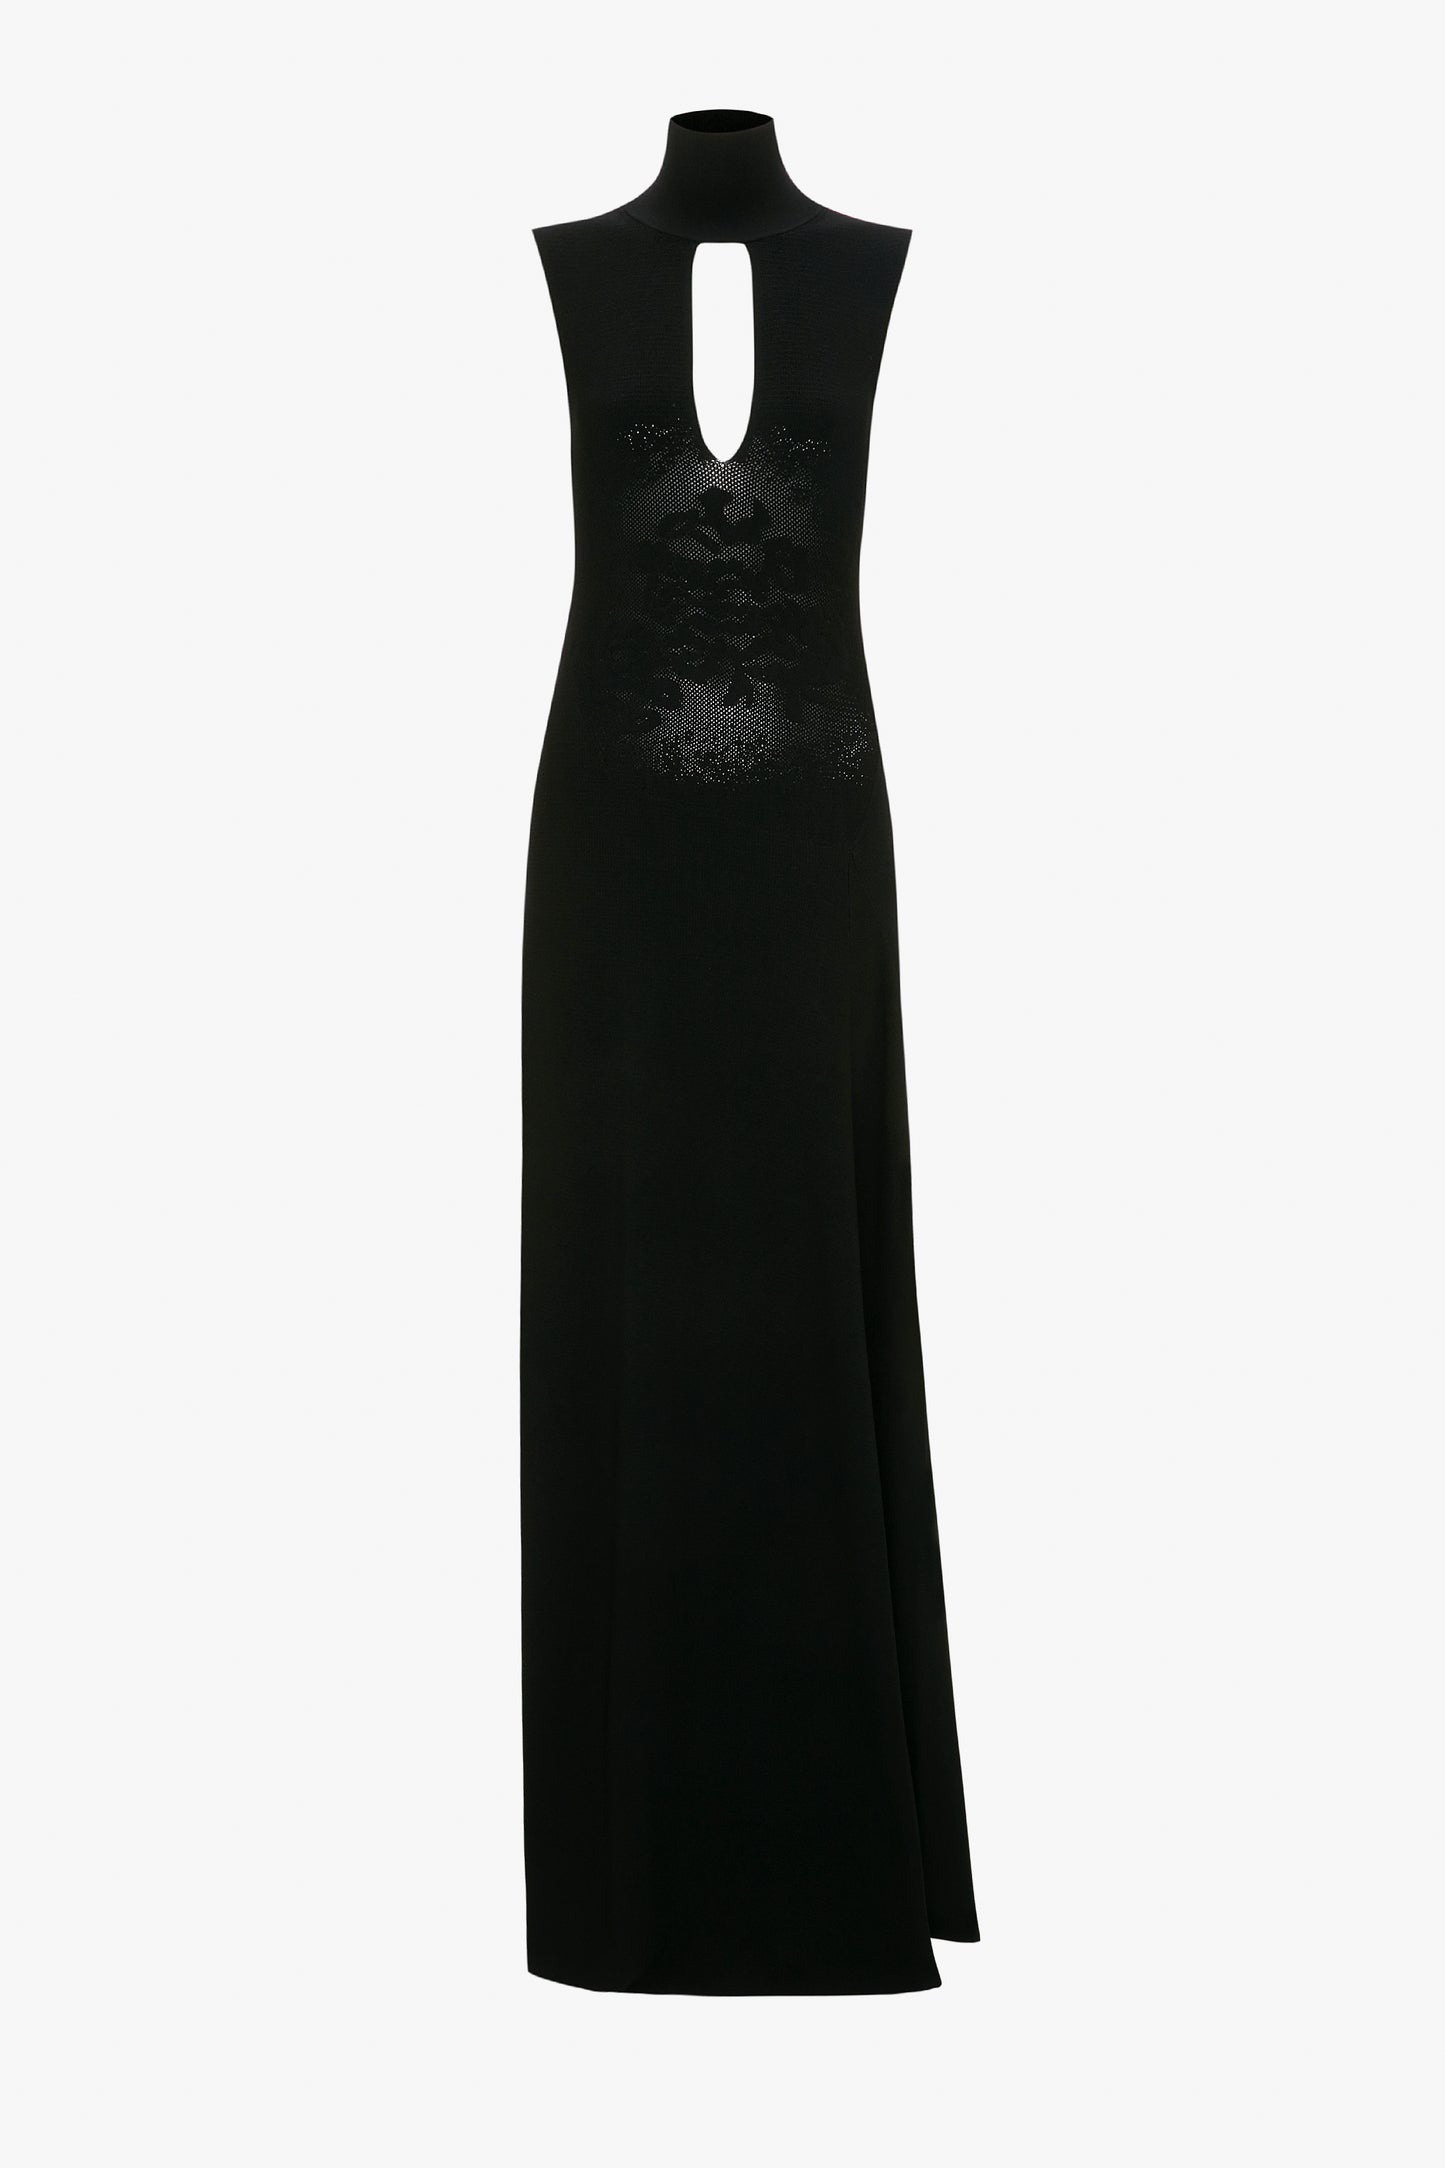 Cut Out Front Floor-Length Dress In Black